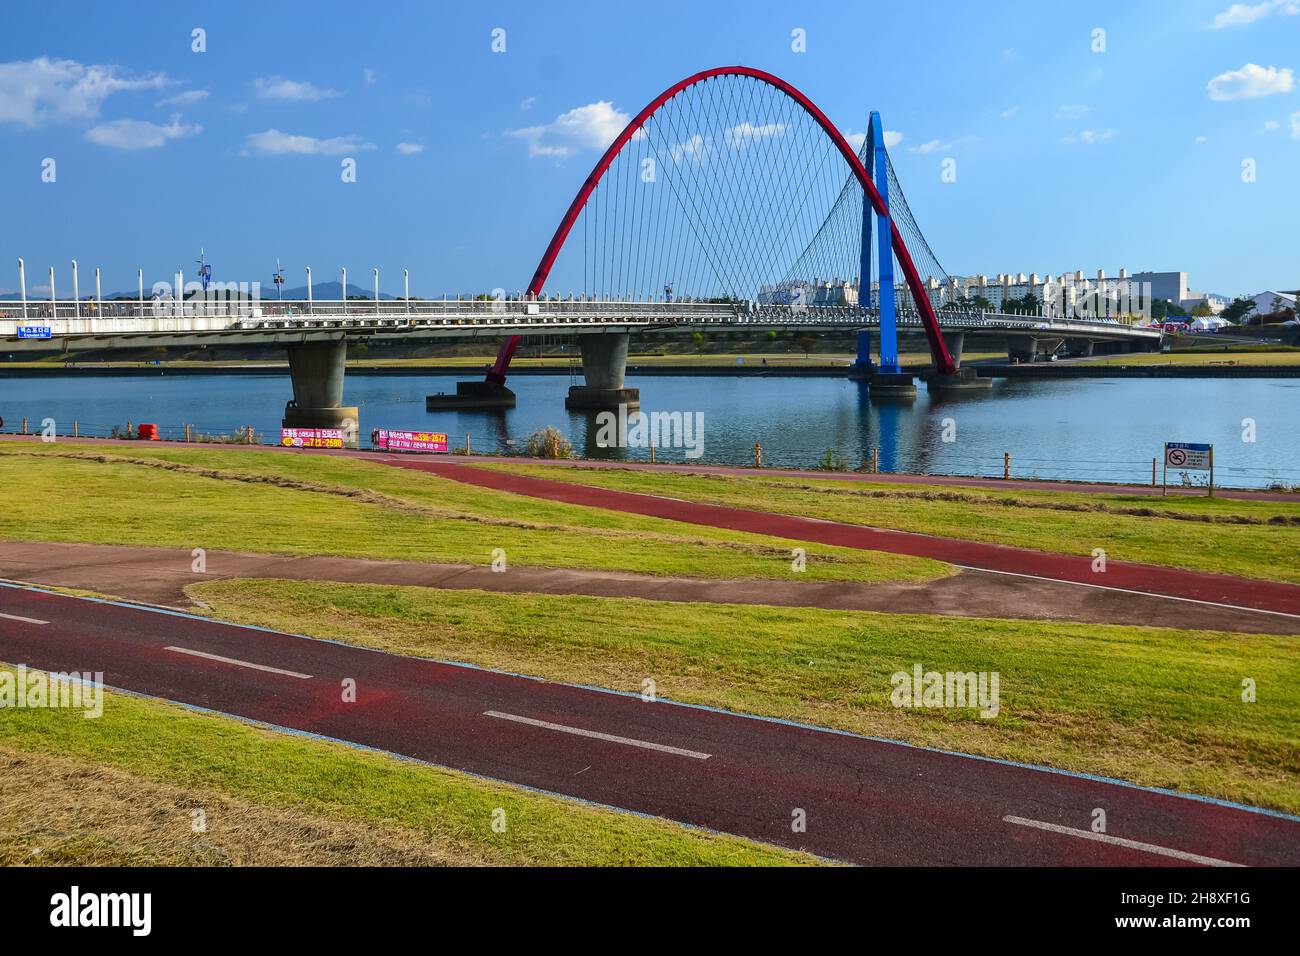 Beautiful shot of the Expo Bridge with a background of blue sky in Daejeon, South Korea. Stock Photo